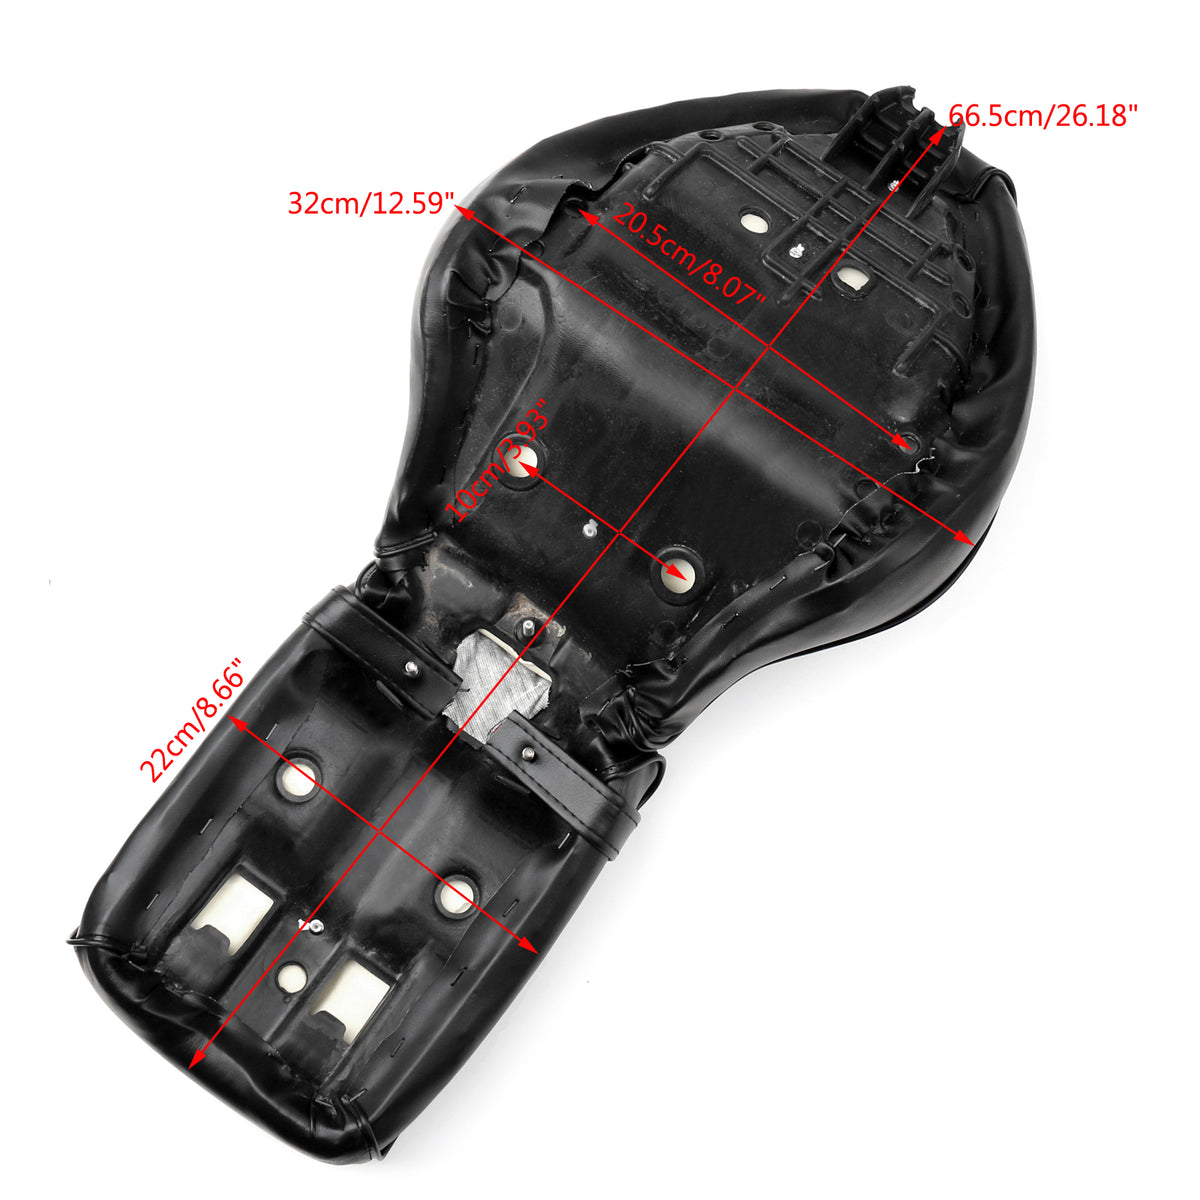 Replace Front Rear Driver Passenger Seat Black For Honda Shadow Vlx Vt 600 88-98 Generic